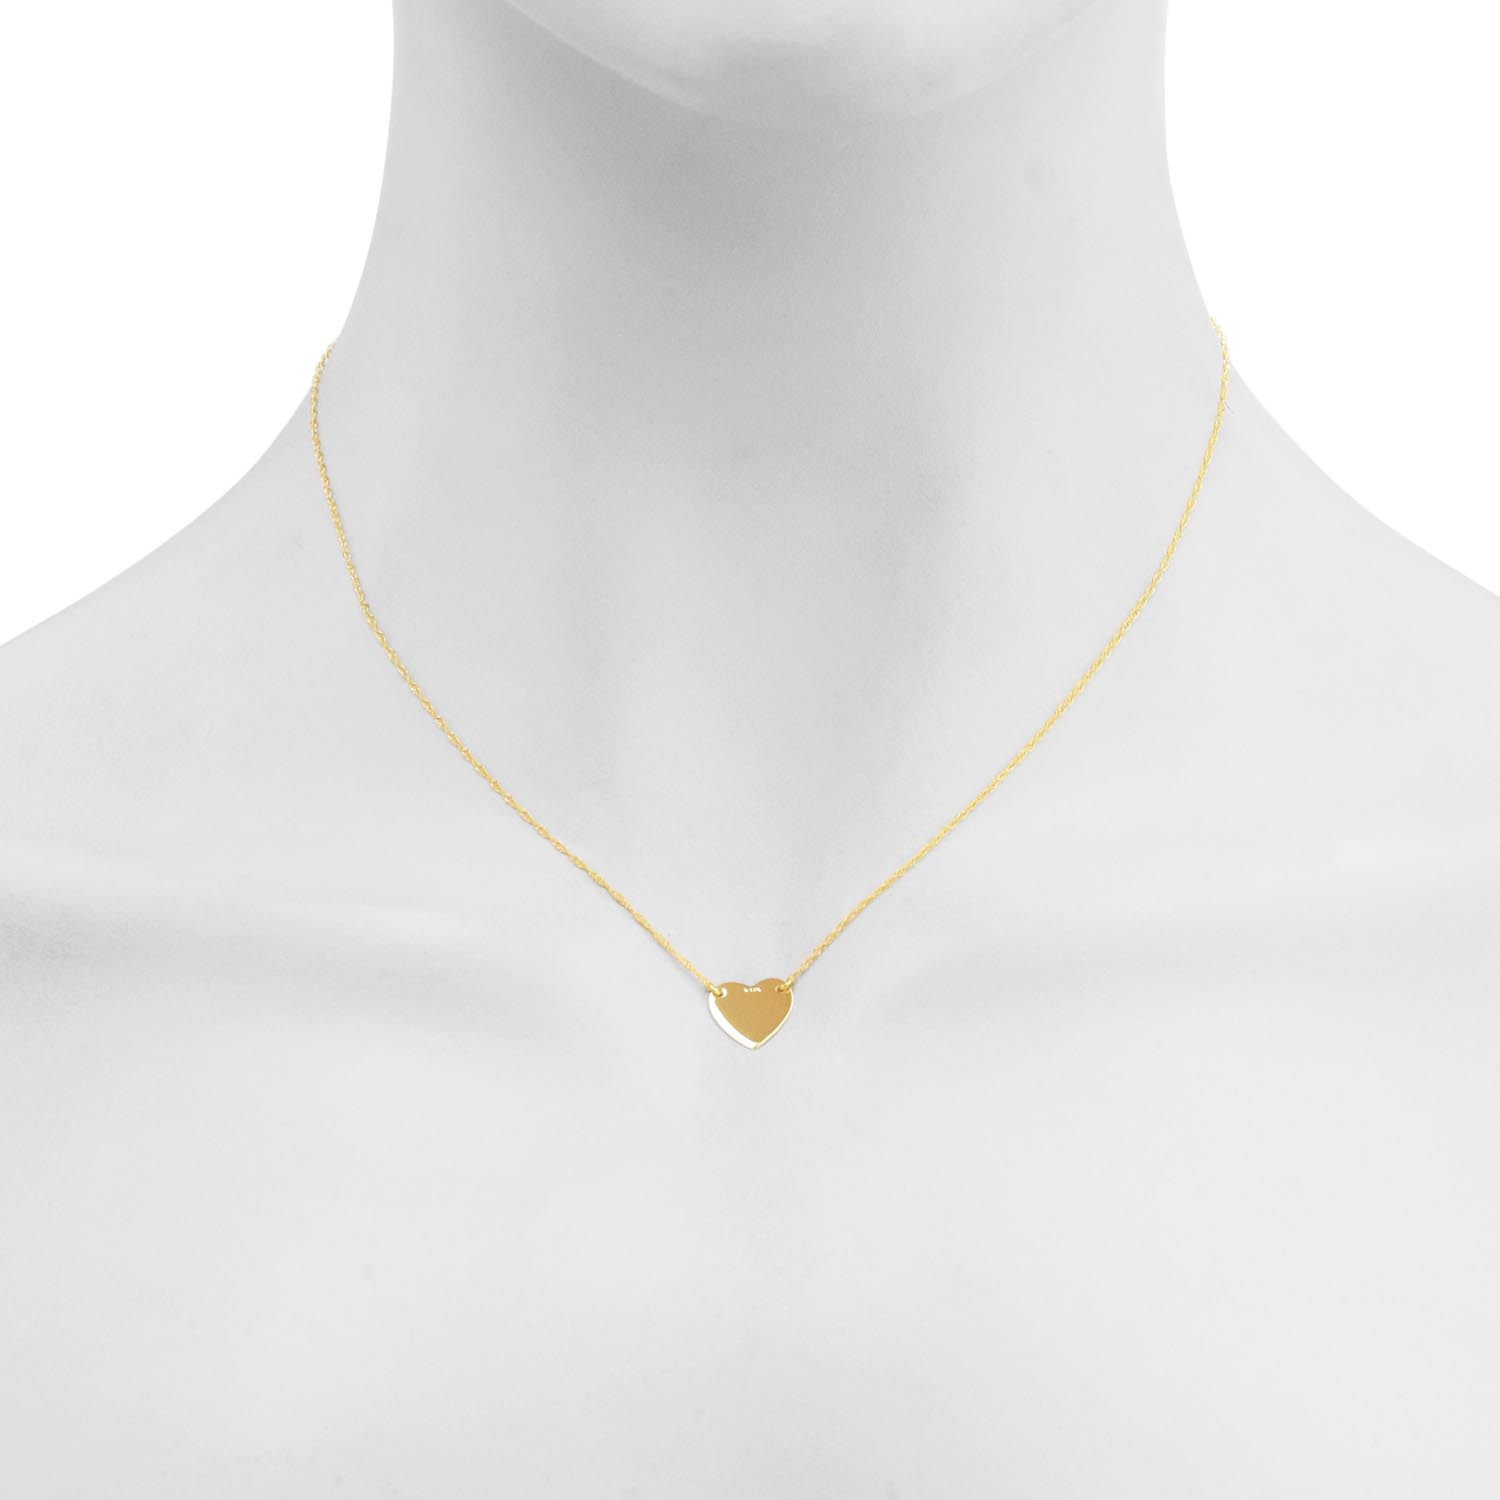 Engravable Heart Necklace in 14kt Yellow Gold